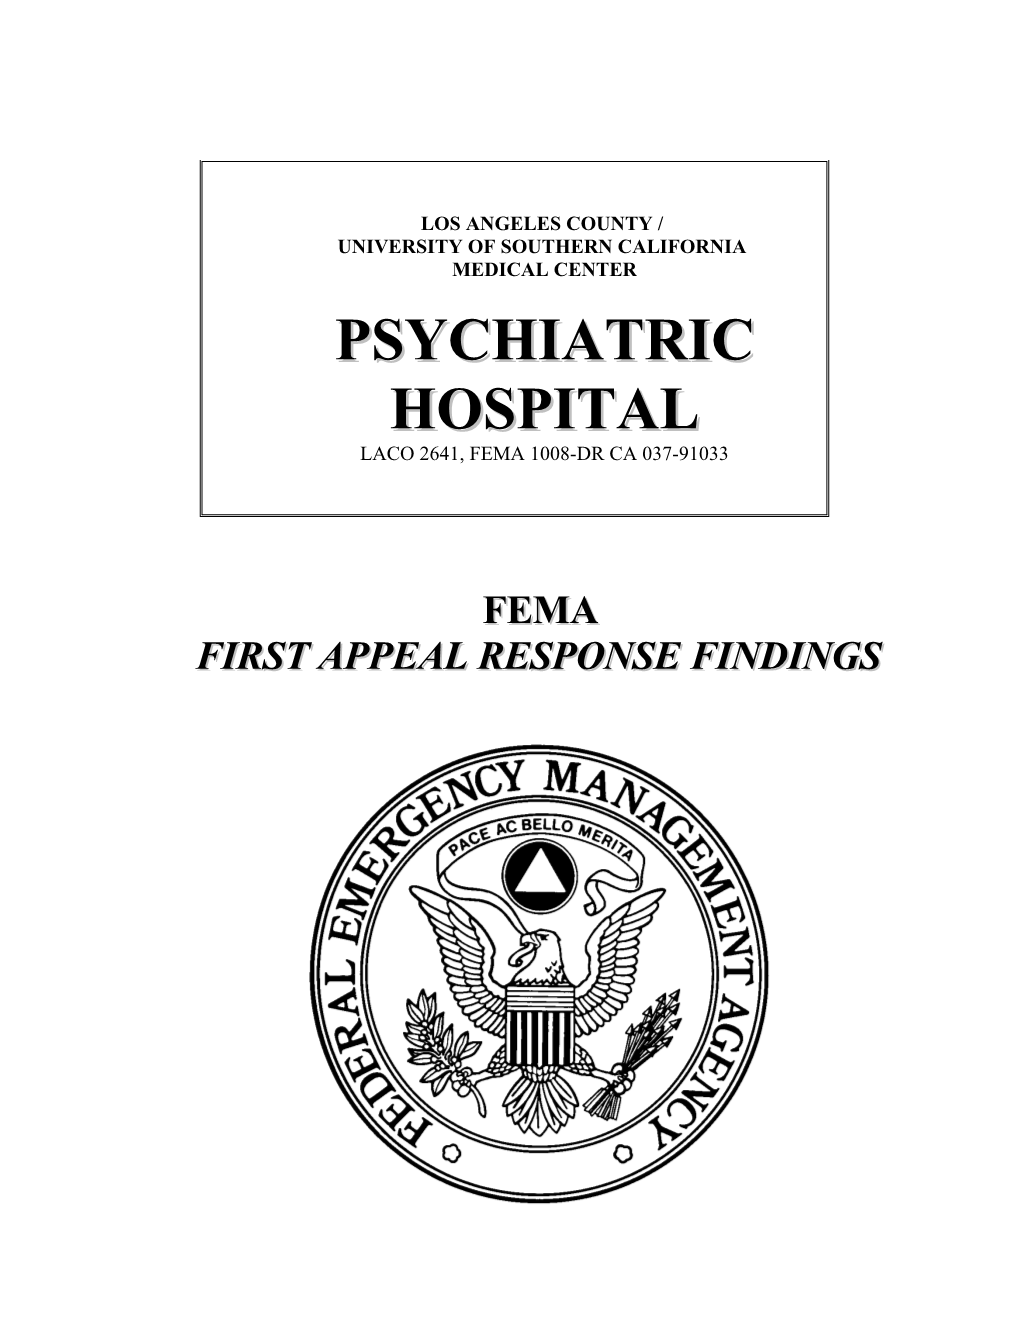 First Appeal Response Findings